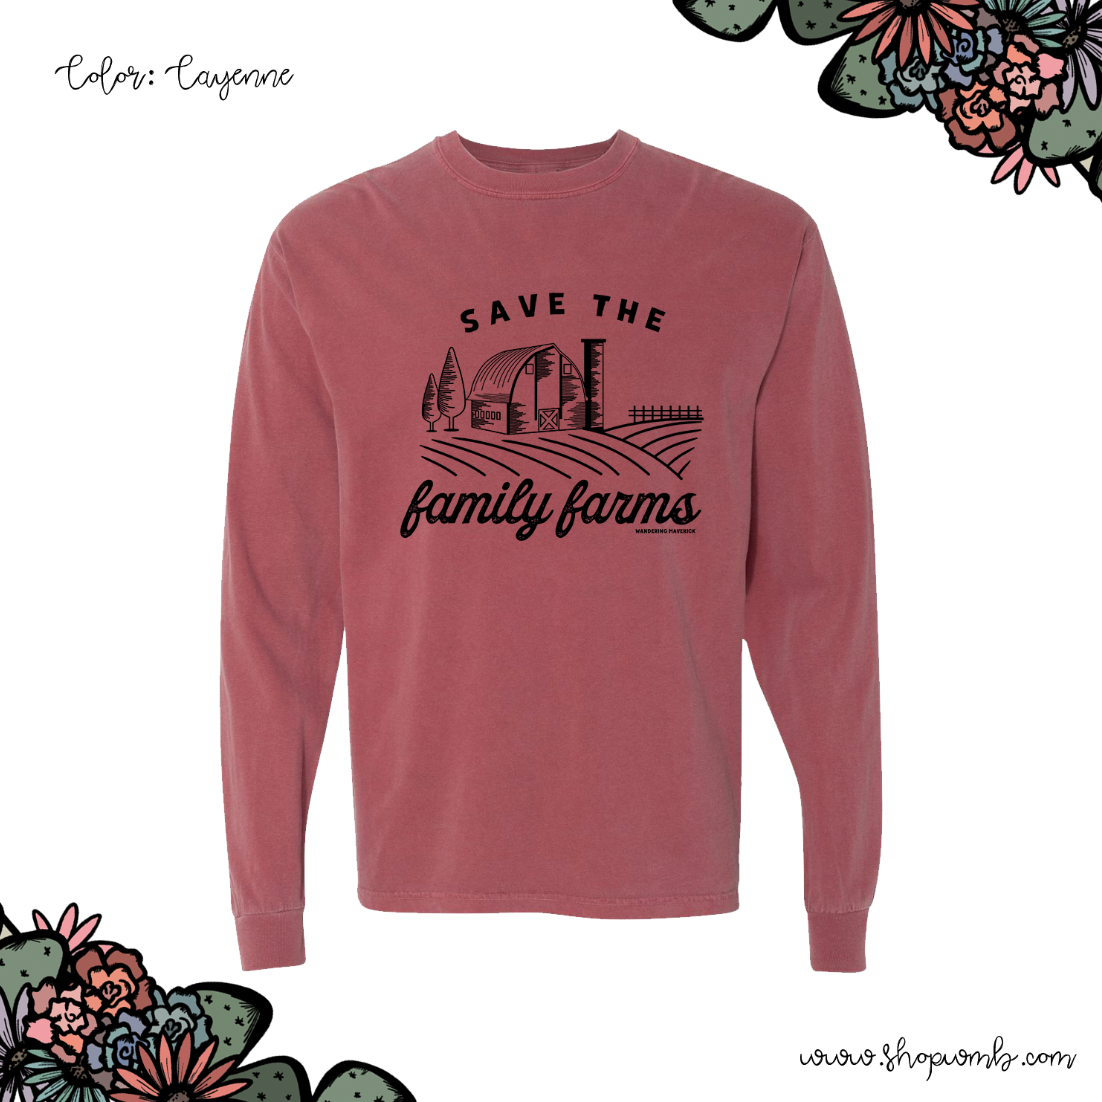 Save The Family Farms LONG SLEEVE T-Shirt (S-3XL) - Multiple Colors!